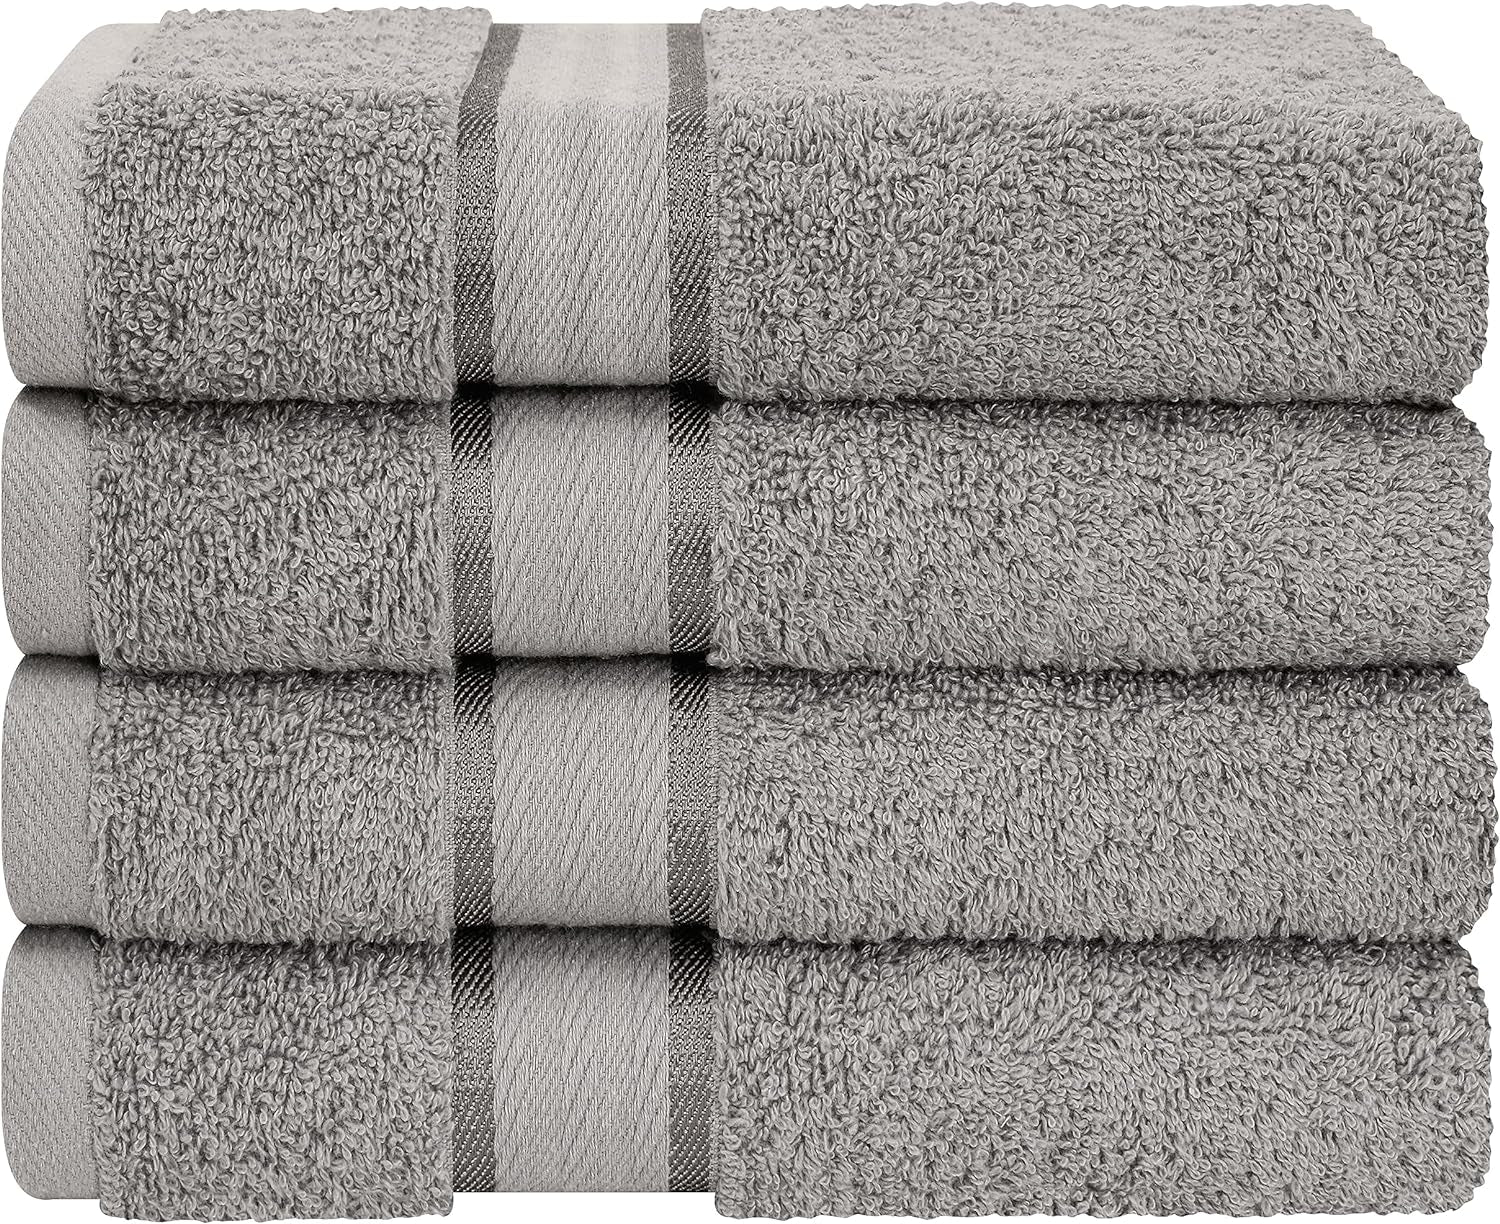 4 Pack Hand Towel Set, 100% Cotton Hand Face Towels for Bathroom, Gray